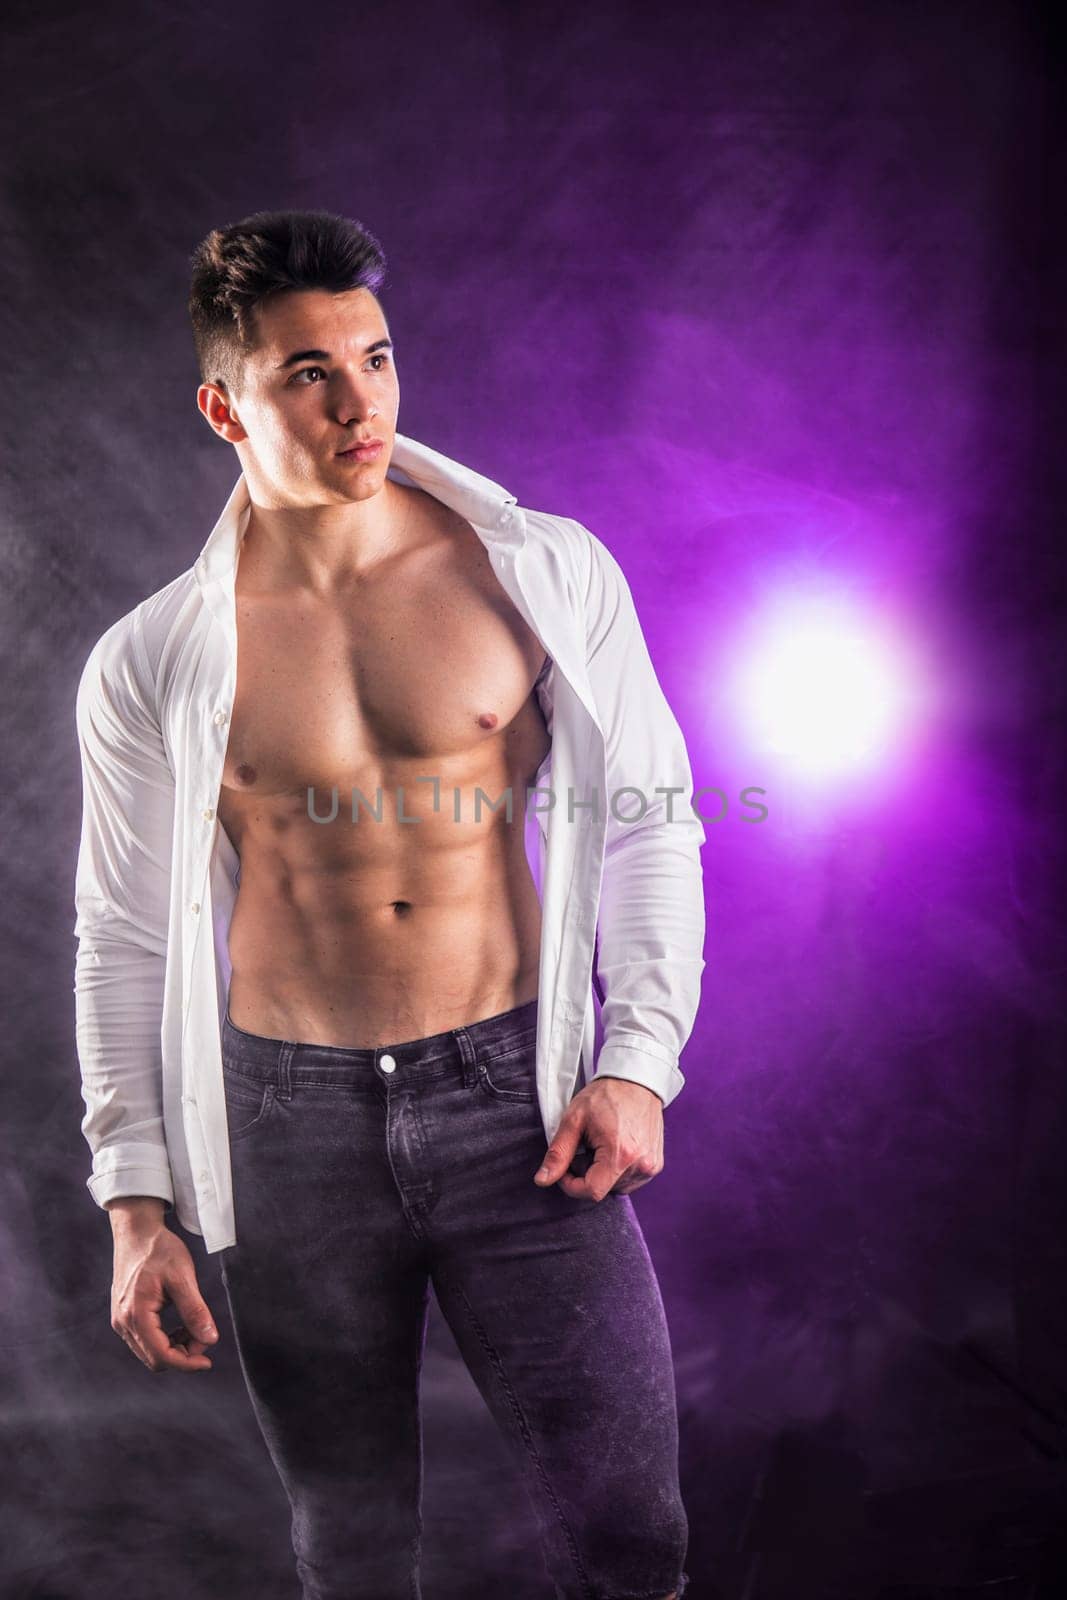 Young muscleman undressing on dark background by artofphoto